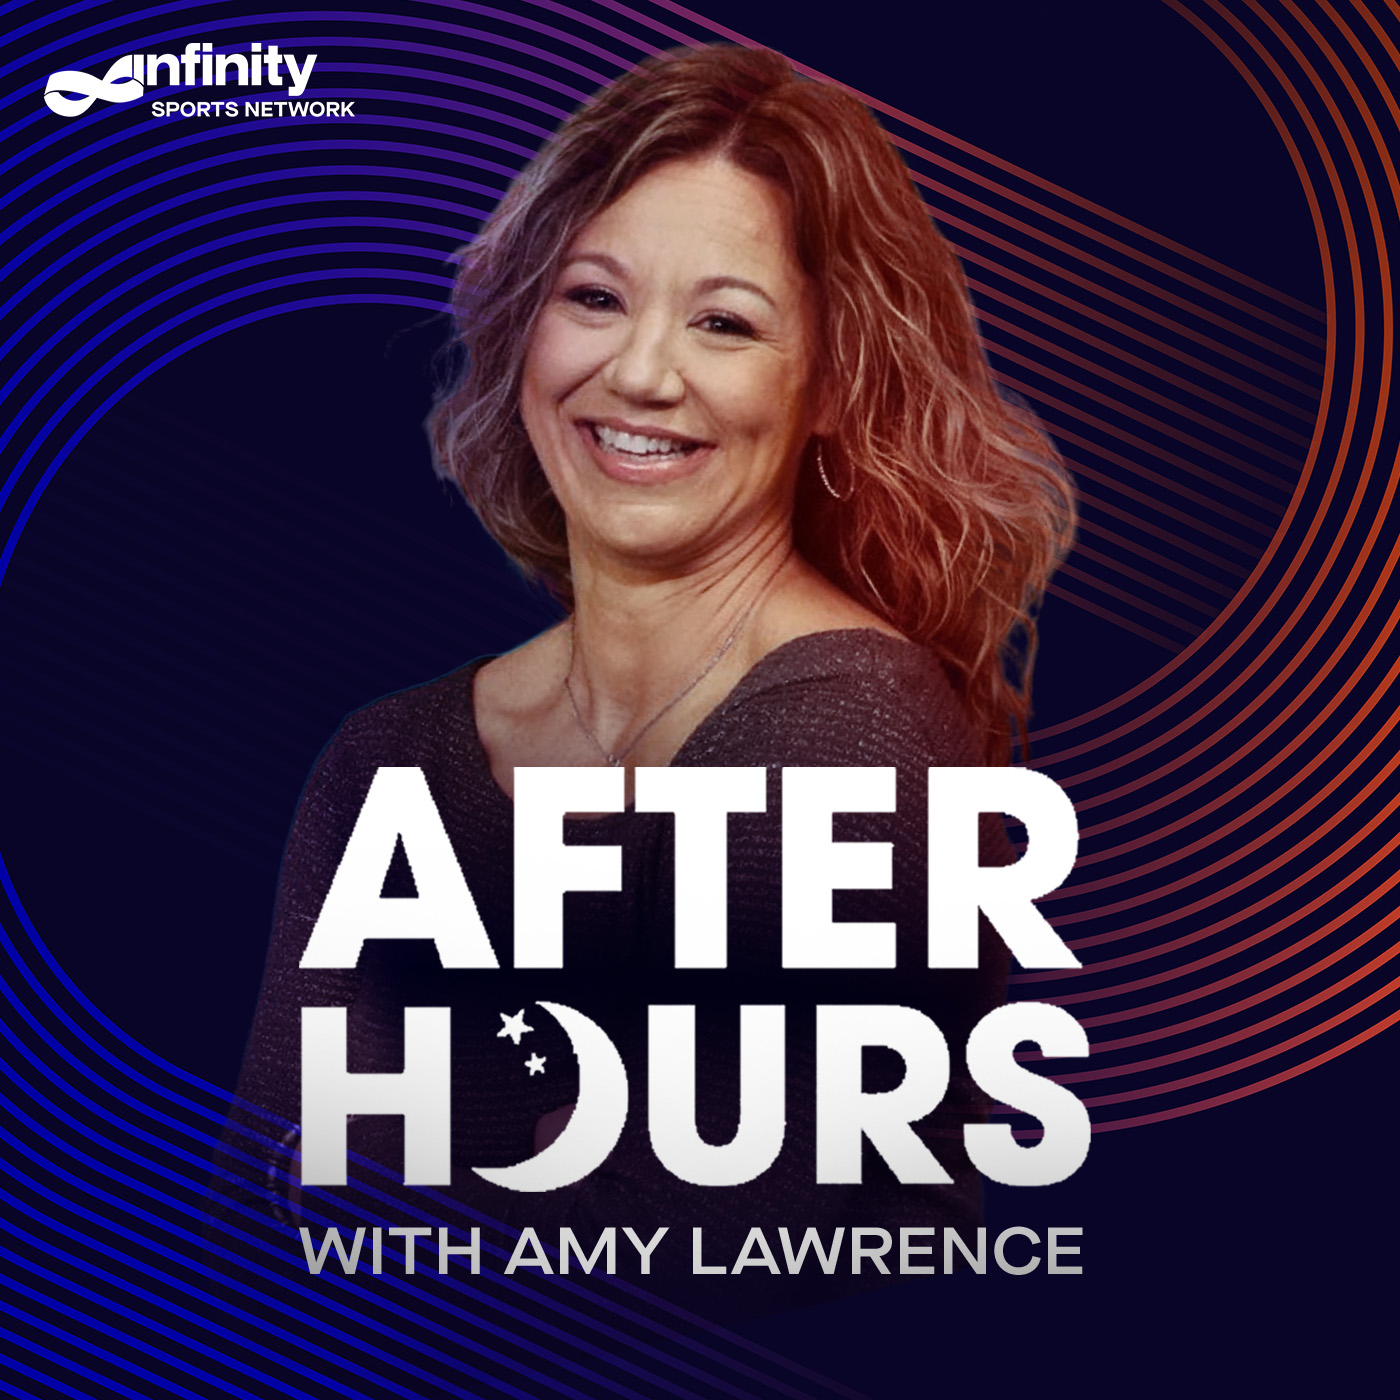 11-10-21 After Hours with Amy Lawrence PODCAT: Hour 4